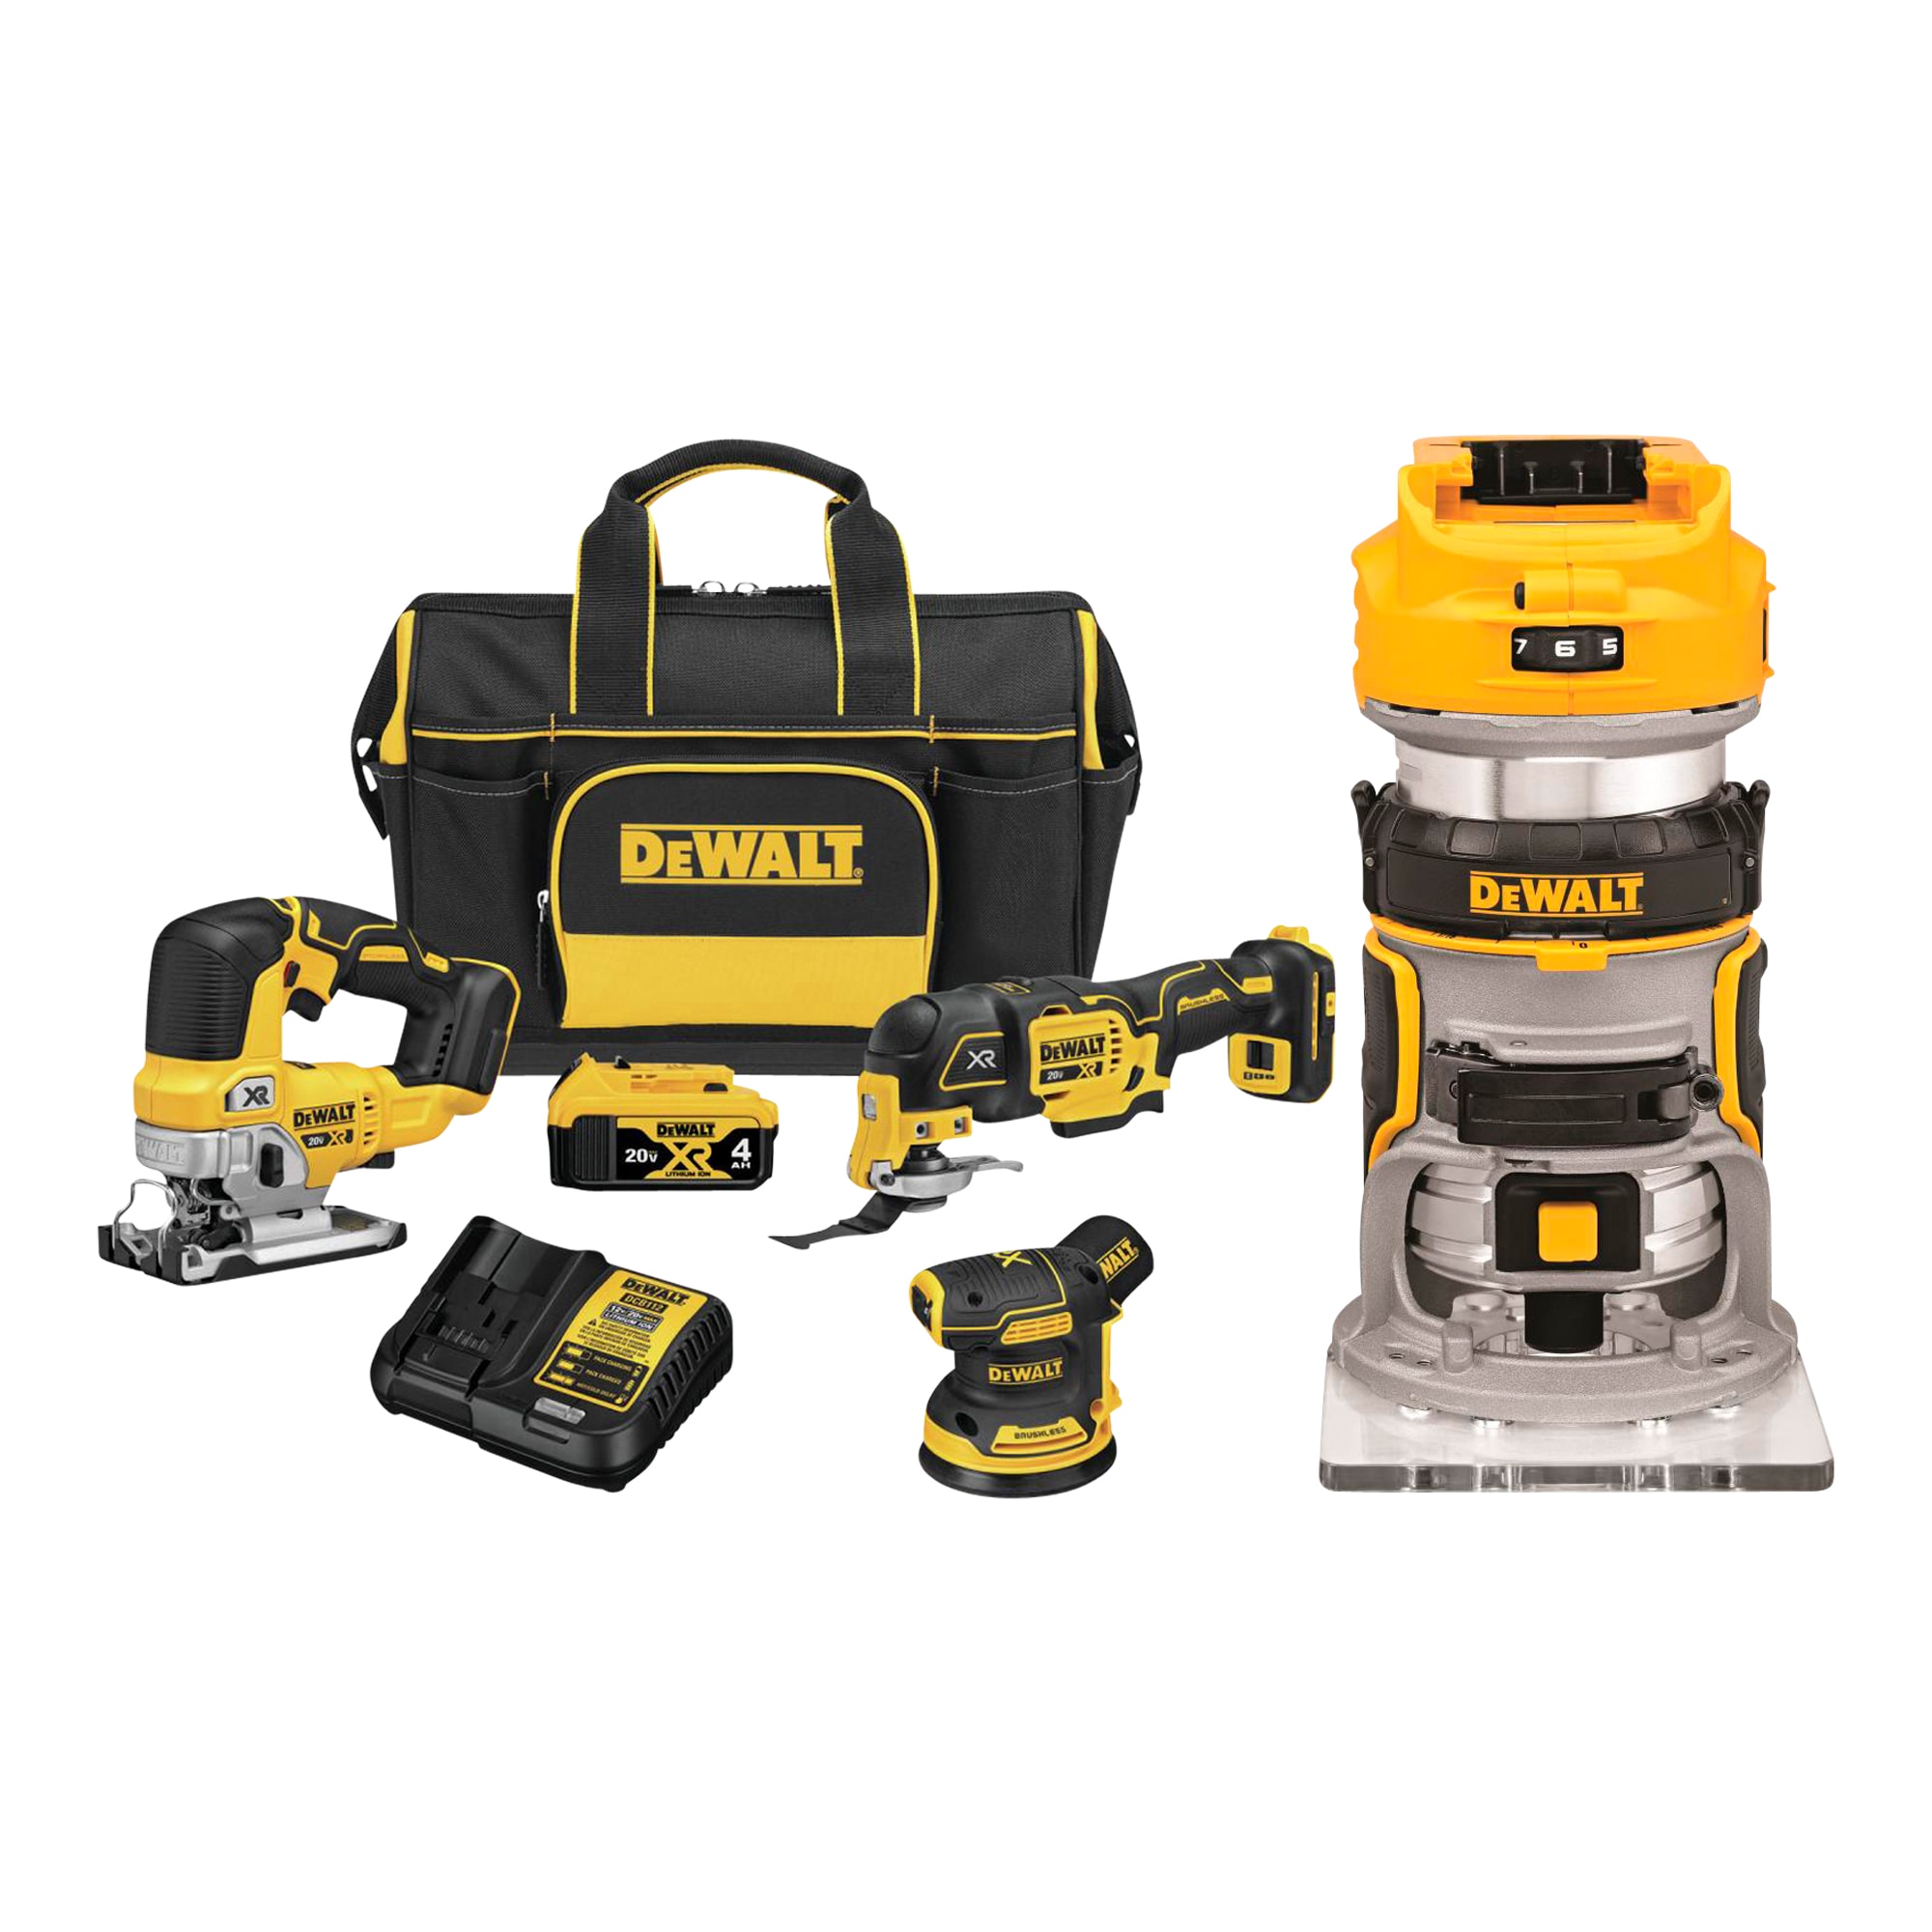 DEWALT XR 3-Tool 20-Volt Max Brushless Power Tool Combo Kit with Soft Case (1-Battery and charger Included) & 1/4-in-Amp Variable Speed Brushless